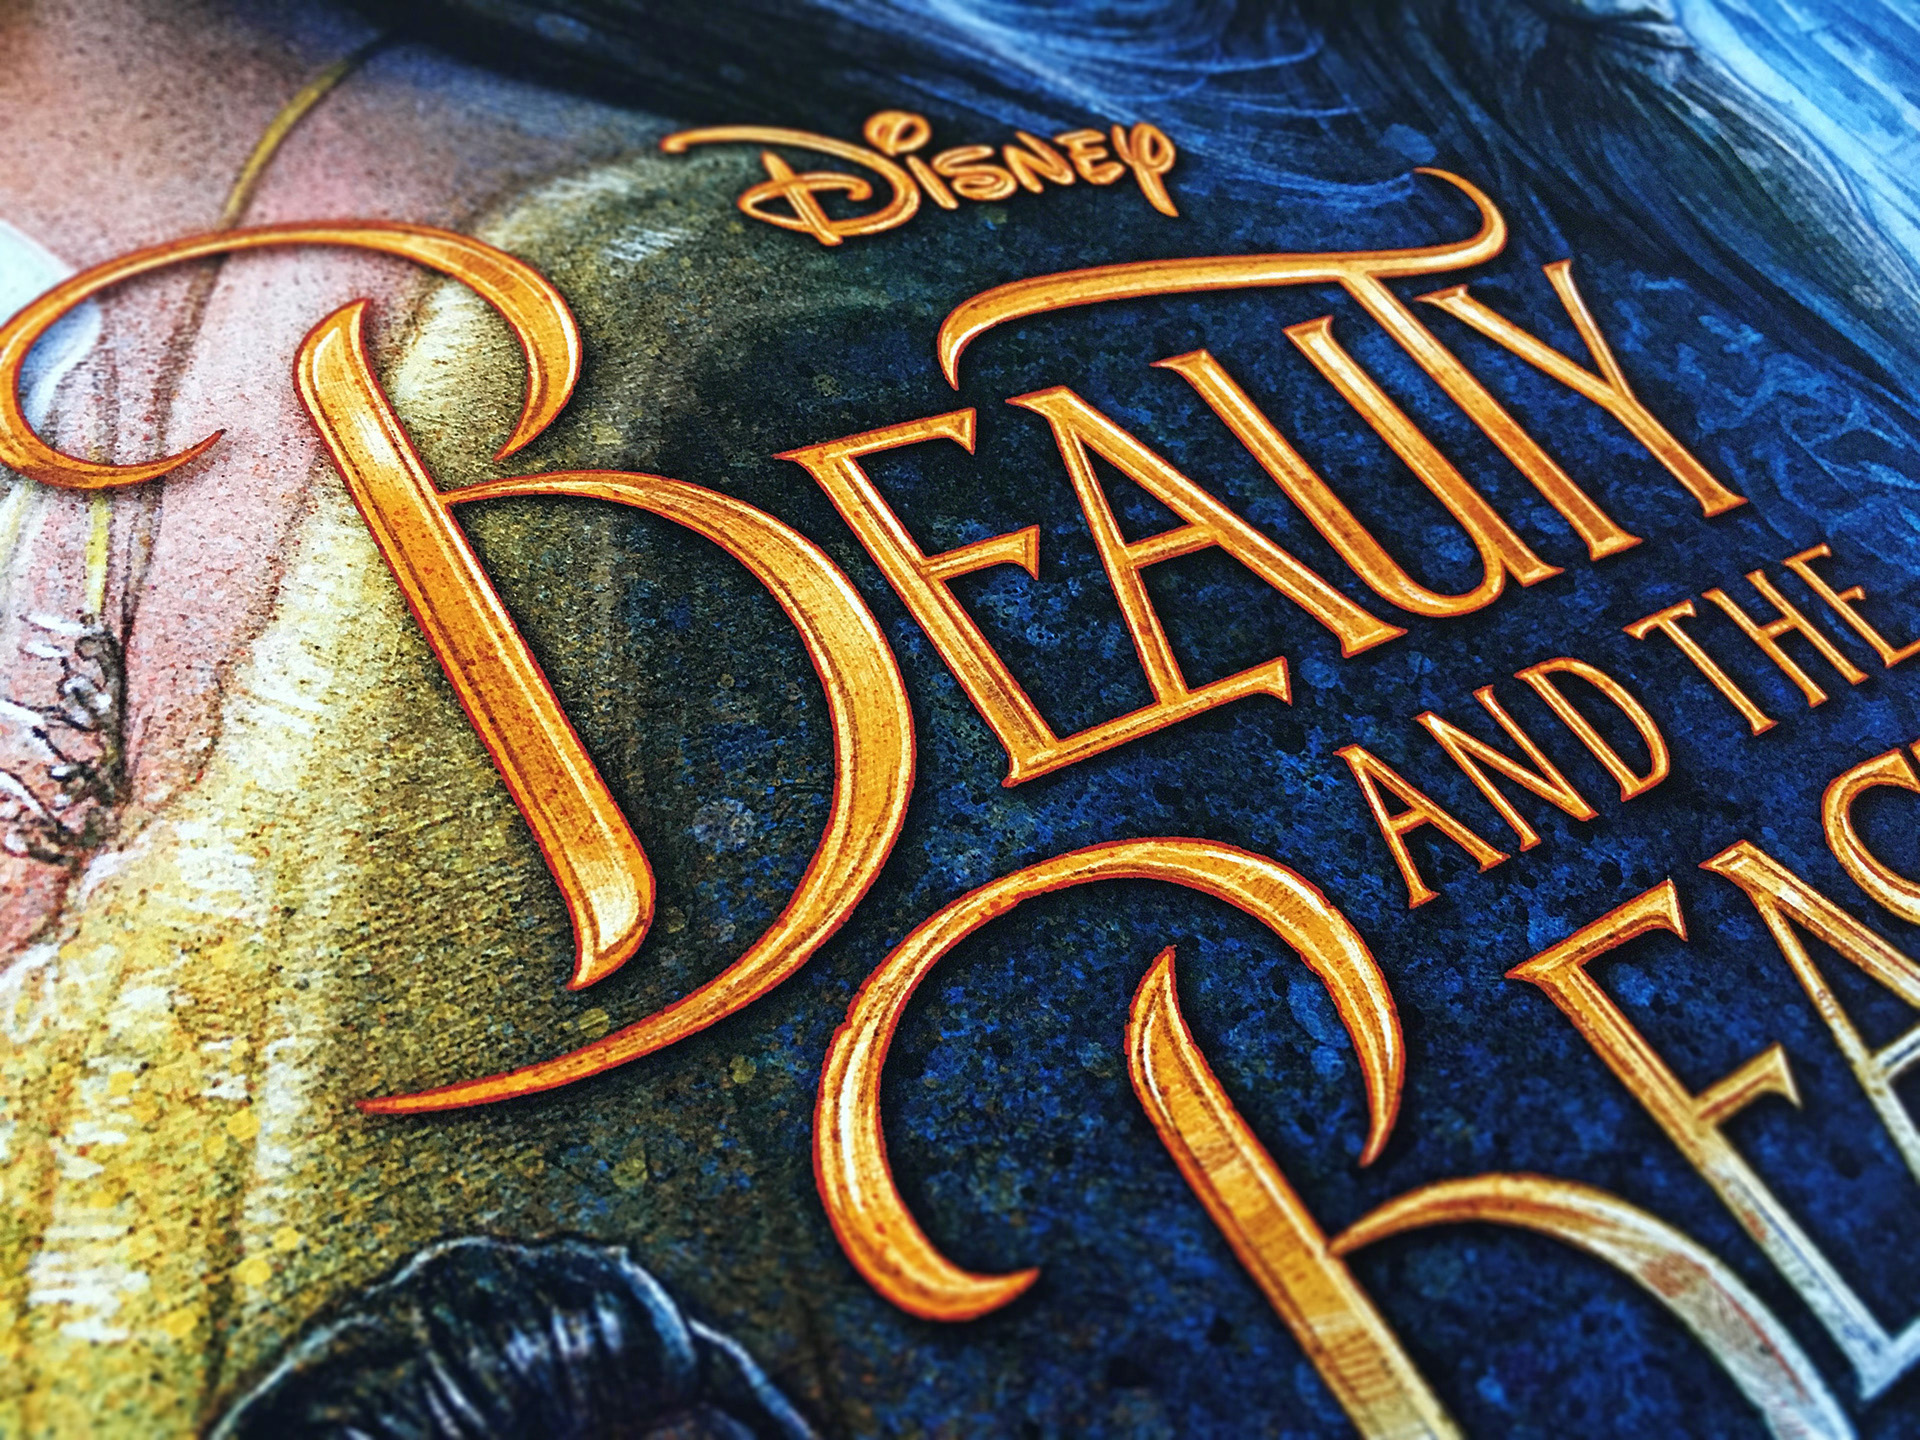 Beauty and the Beast Poster Close-up by Kyle Lambert